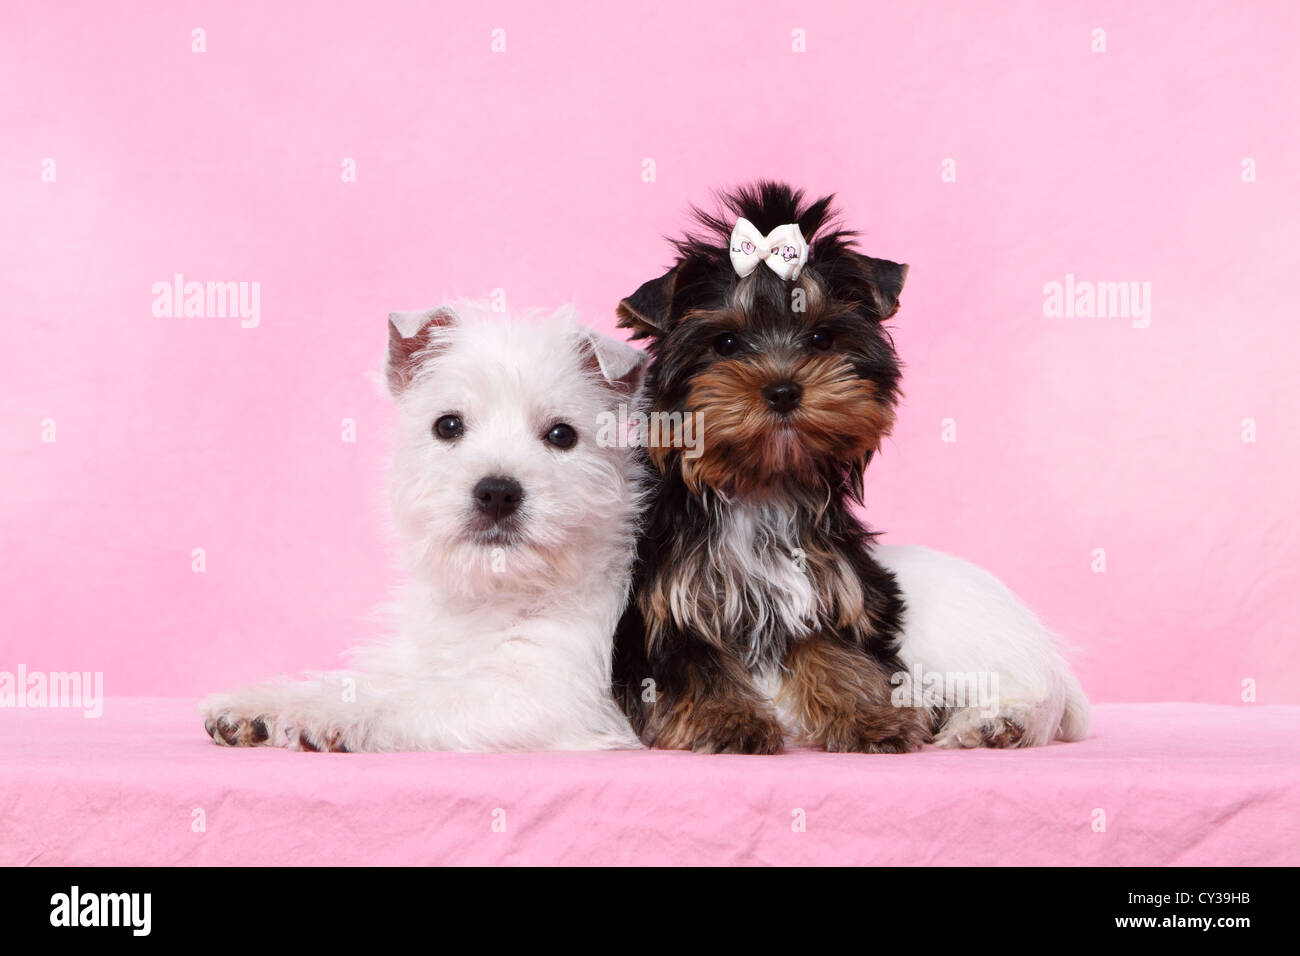 West Highland White Terrier and Yorkshire Terrier Puppy Stock Photo